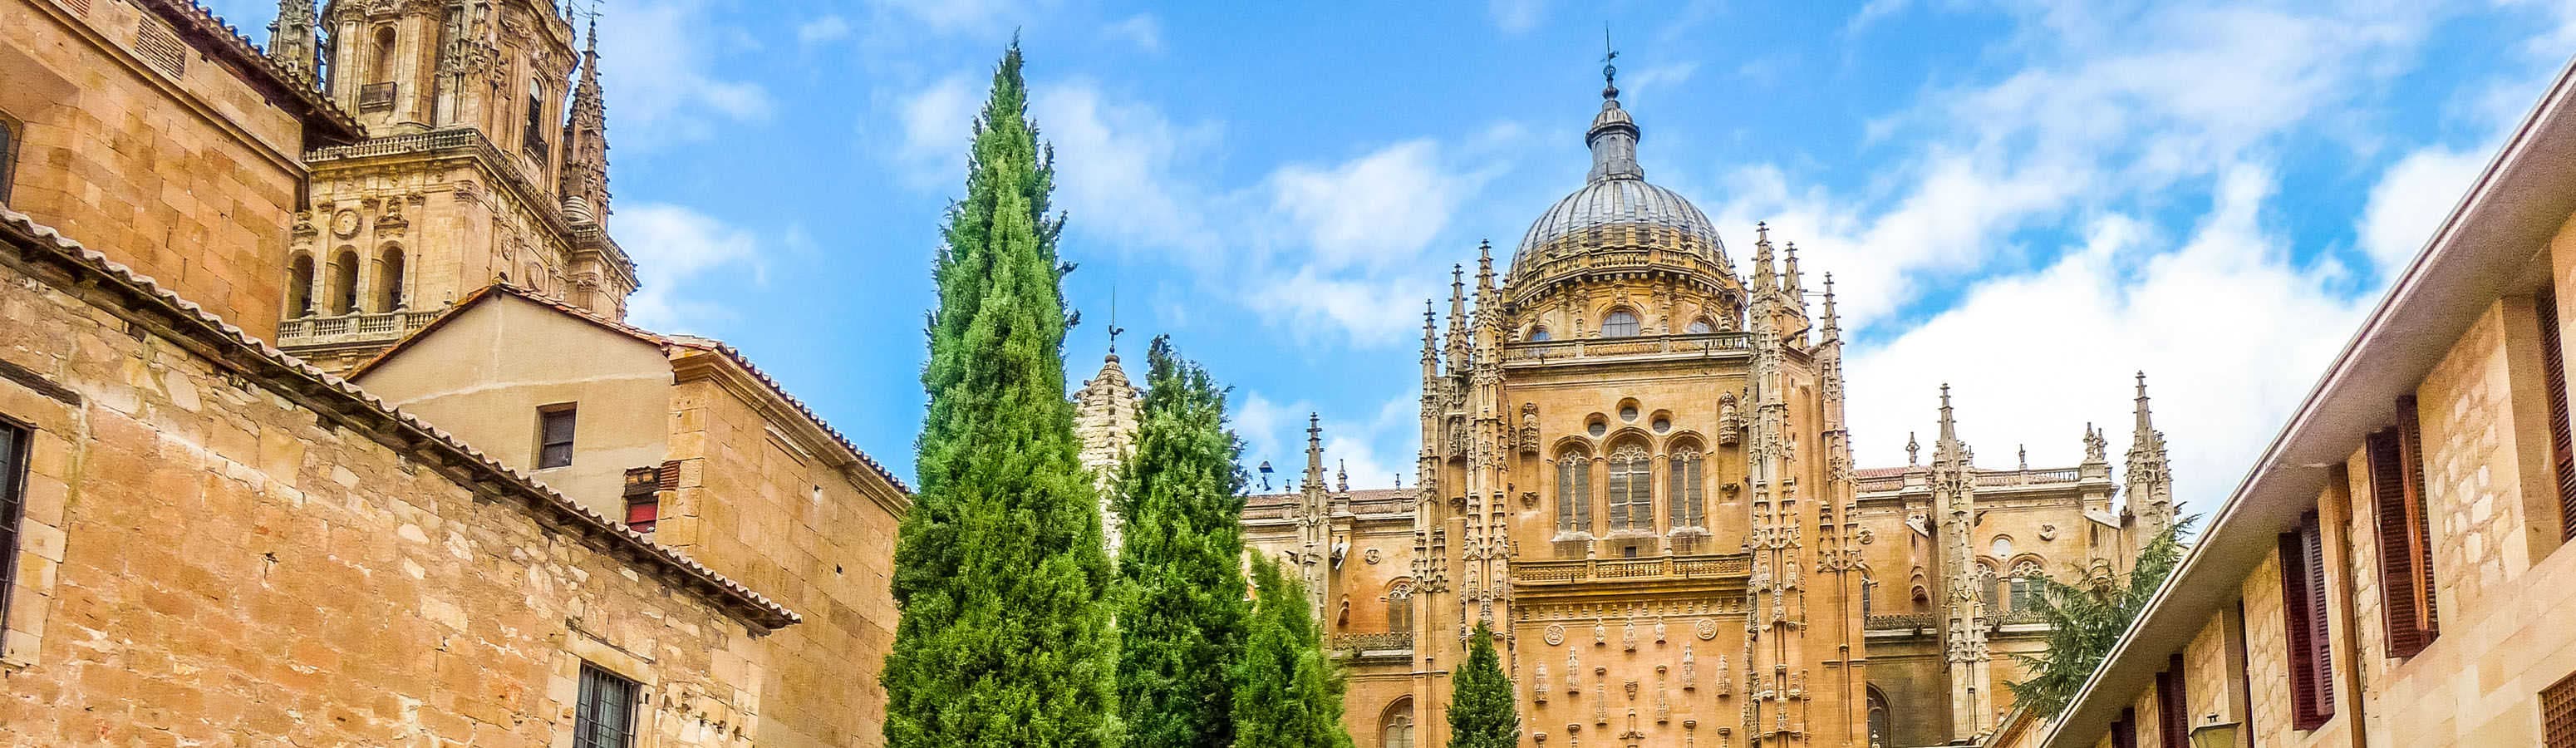 The oldest university in Europe can be found in Salamanca